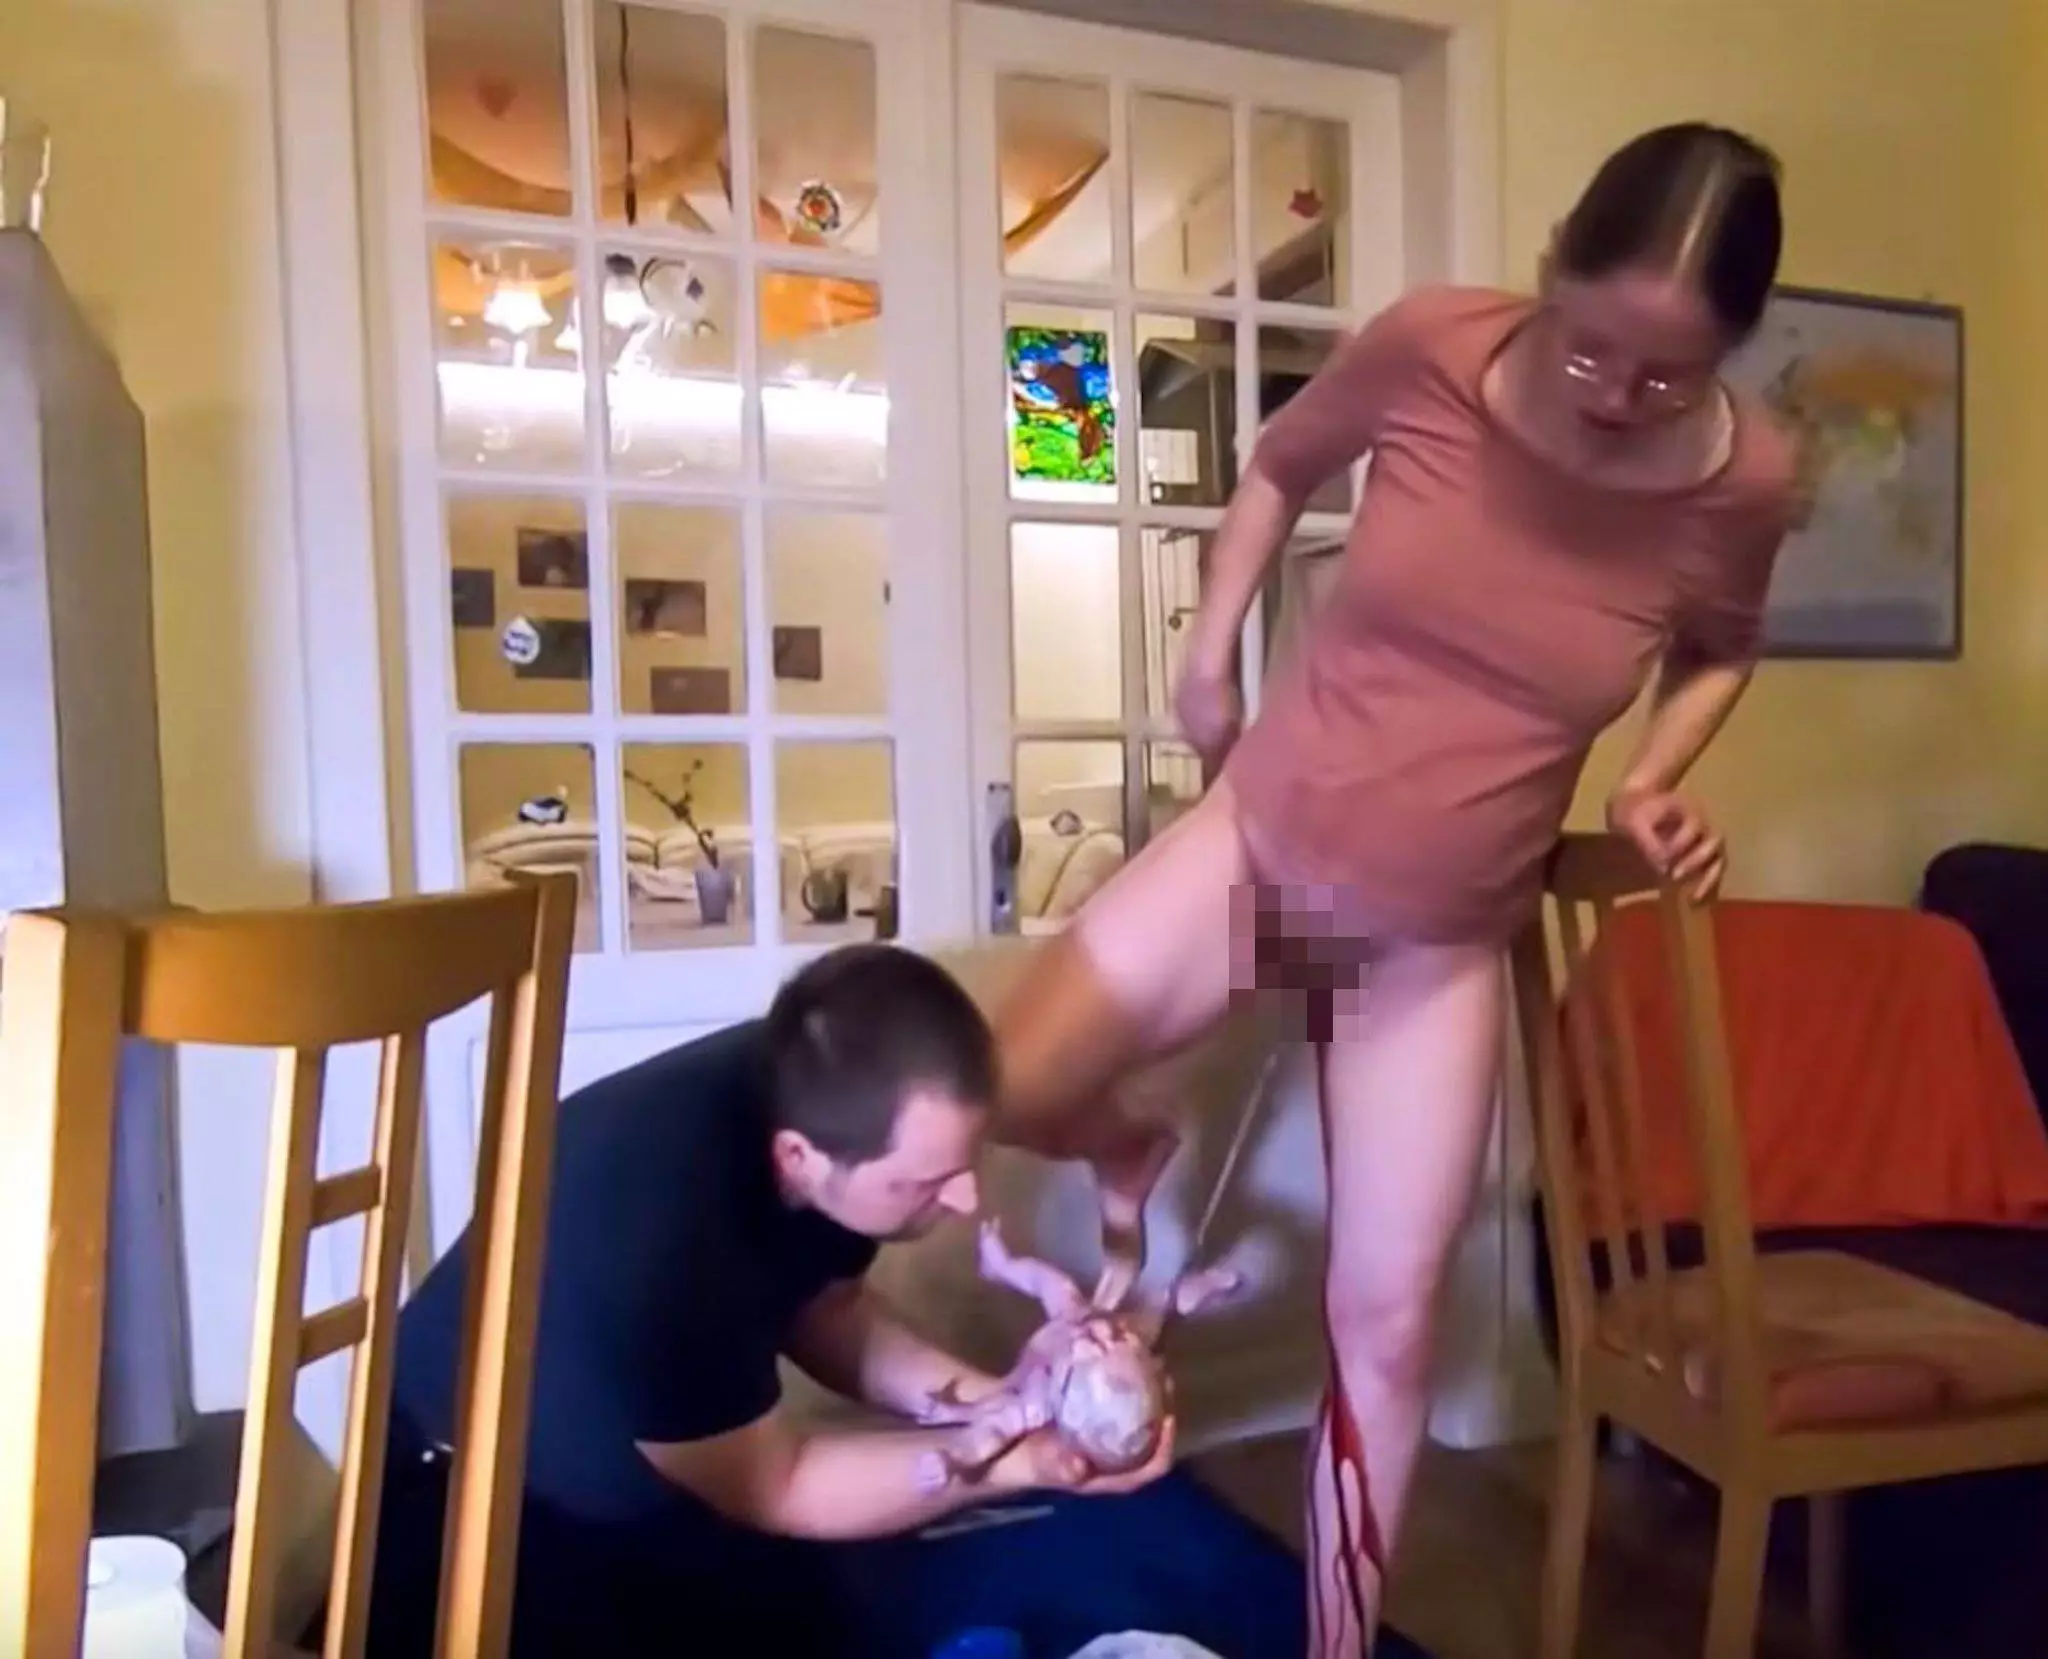 The mum filmed her birth for people to watch online (